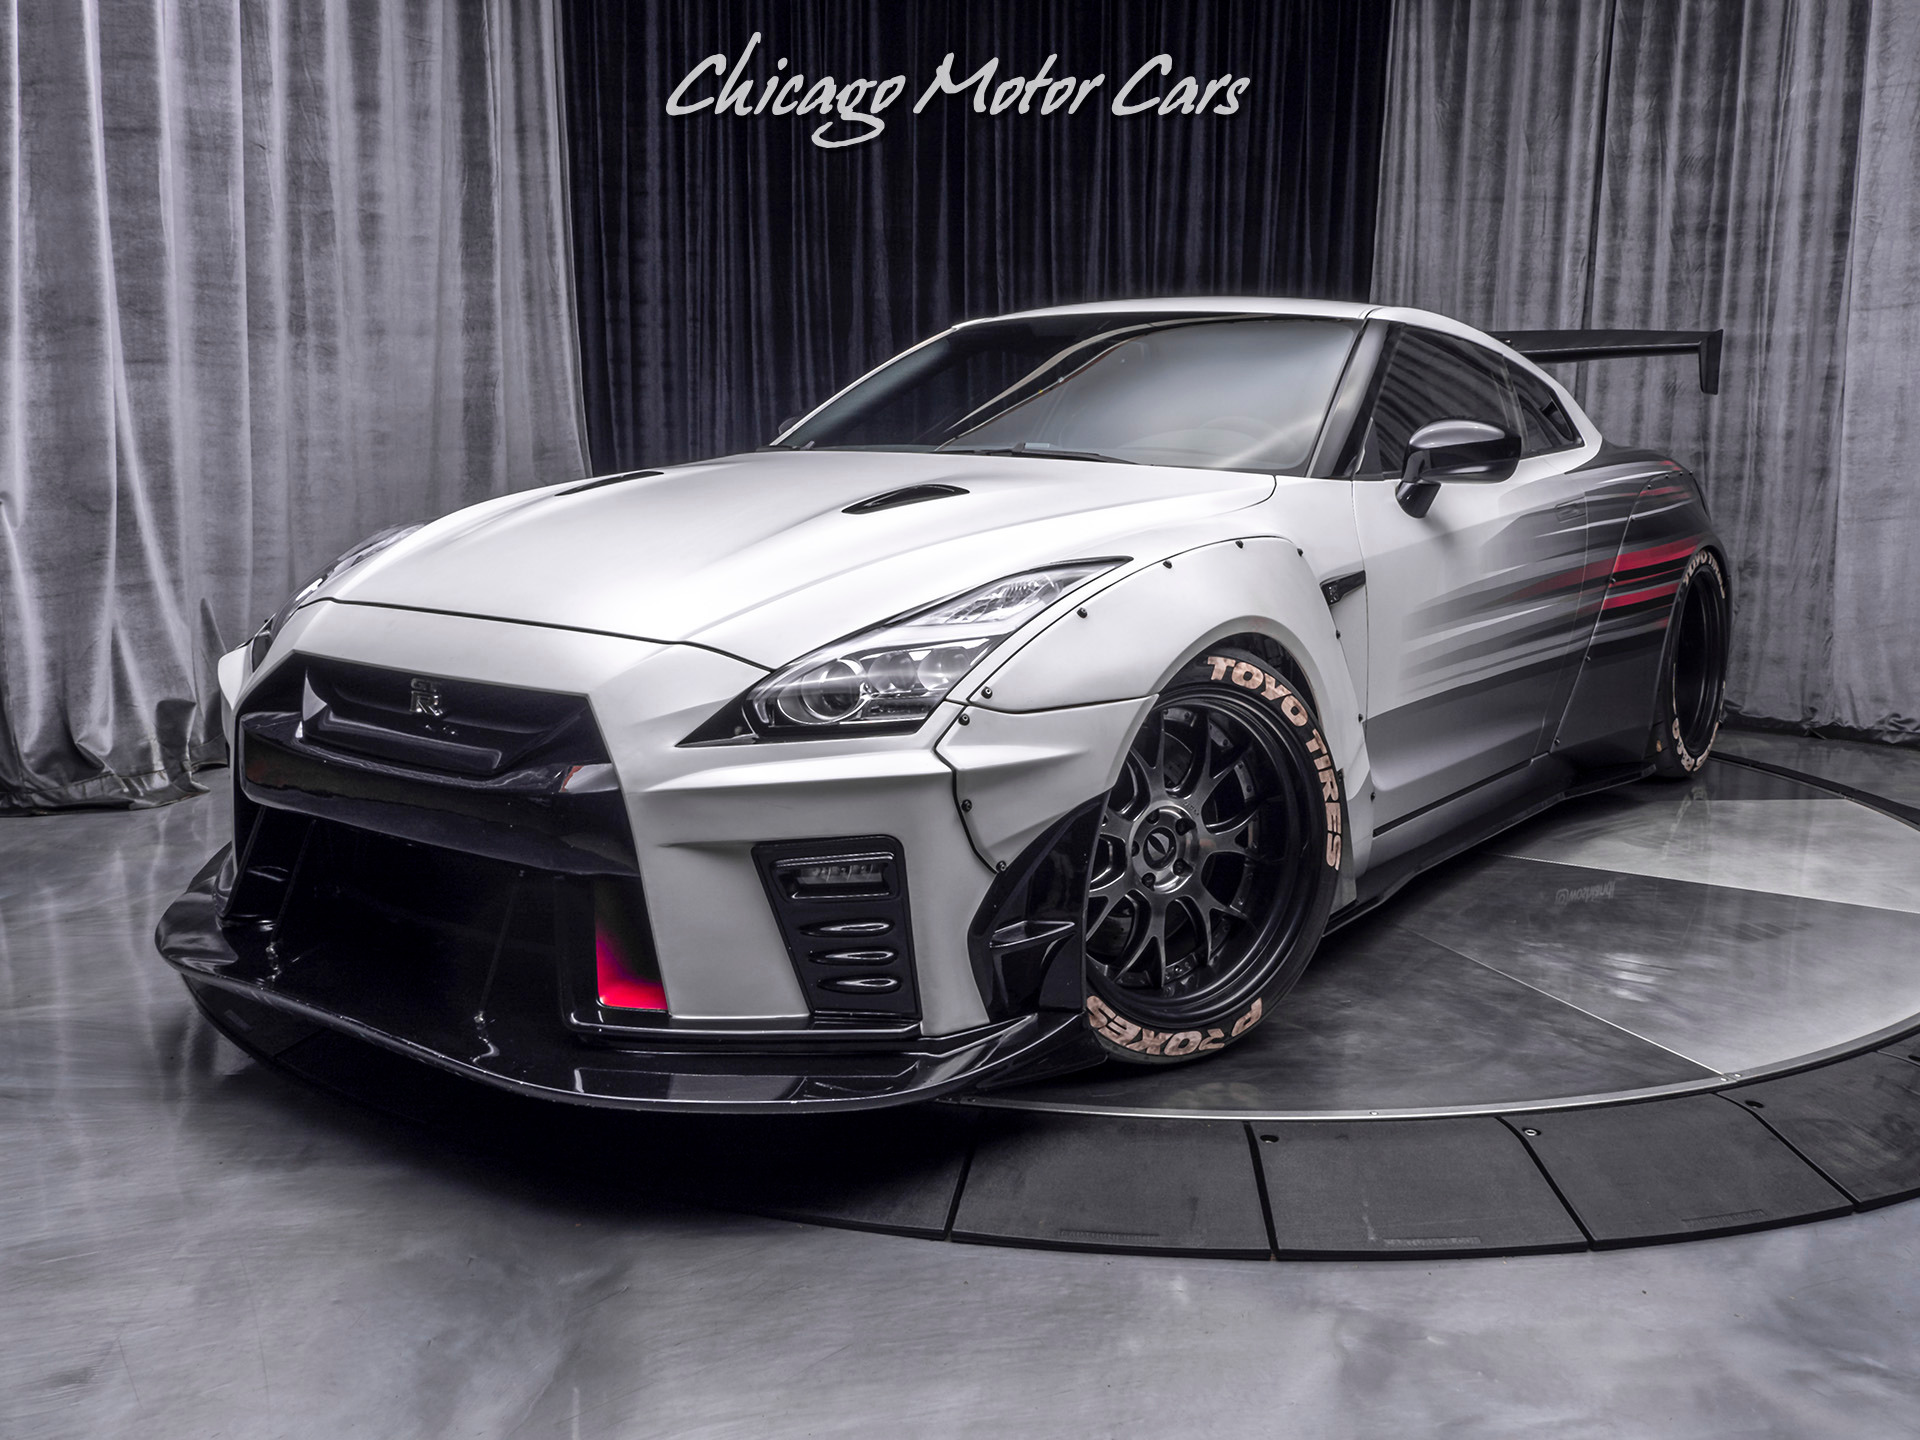 Used-2017-Nissan-GT-R-Premium-Coupe-WIDEBODYBAGGED-FULL-BOLT-ON-650WHP